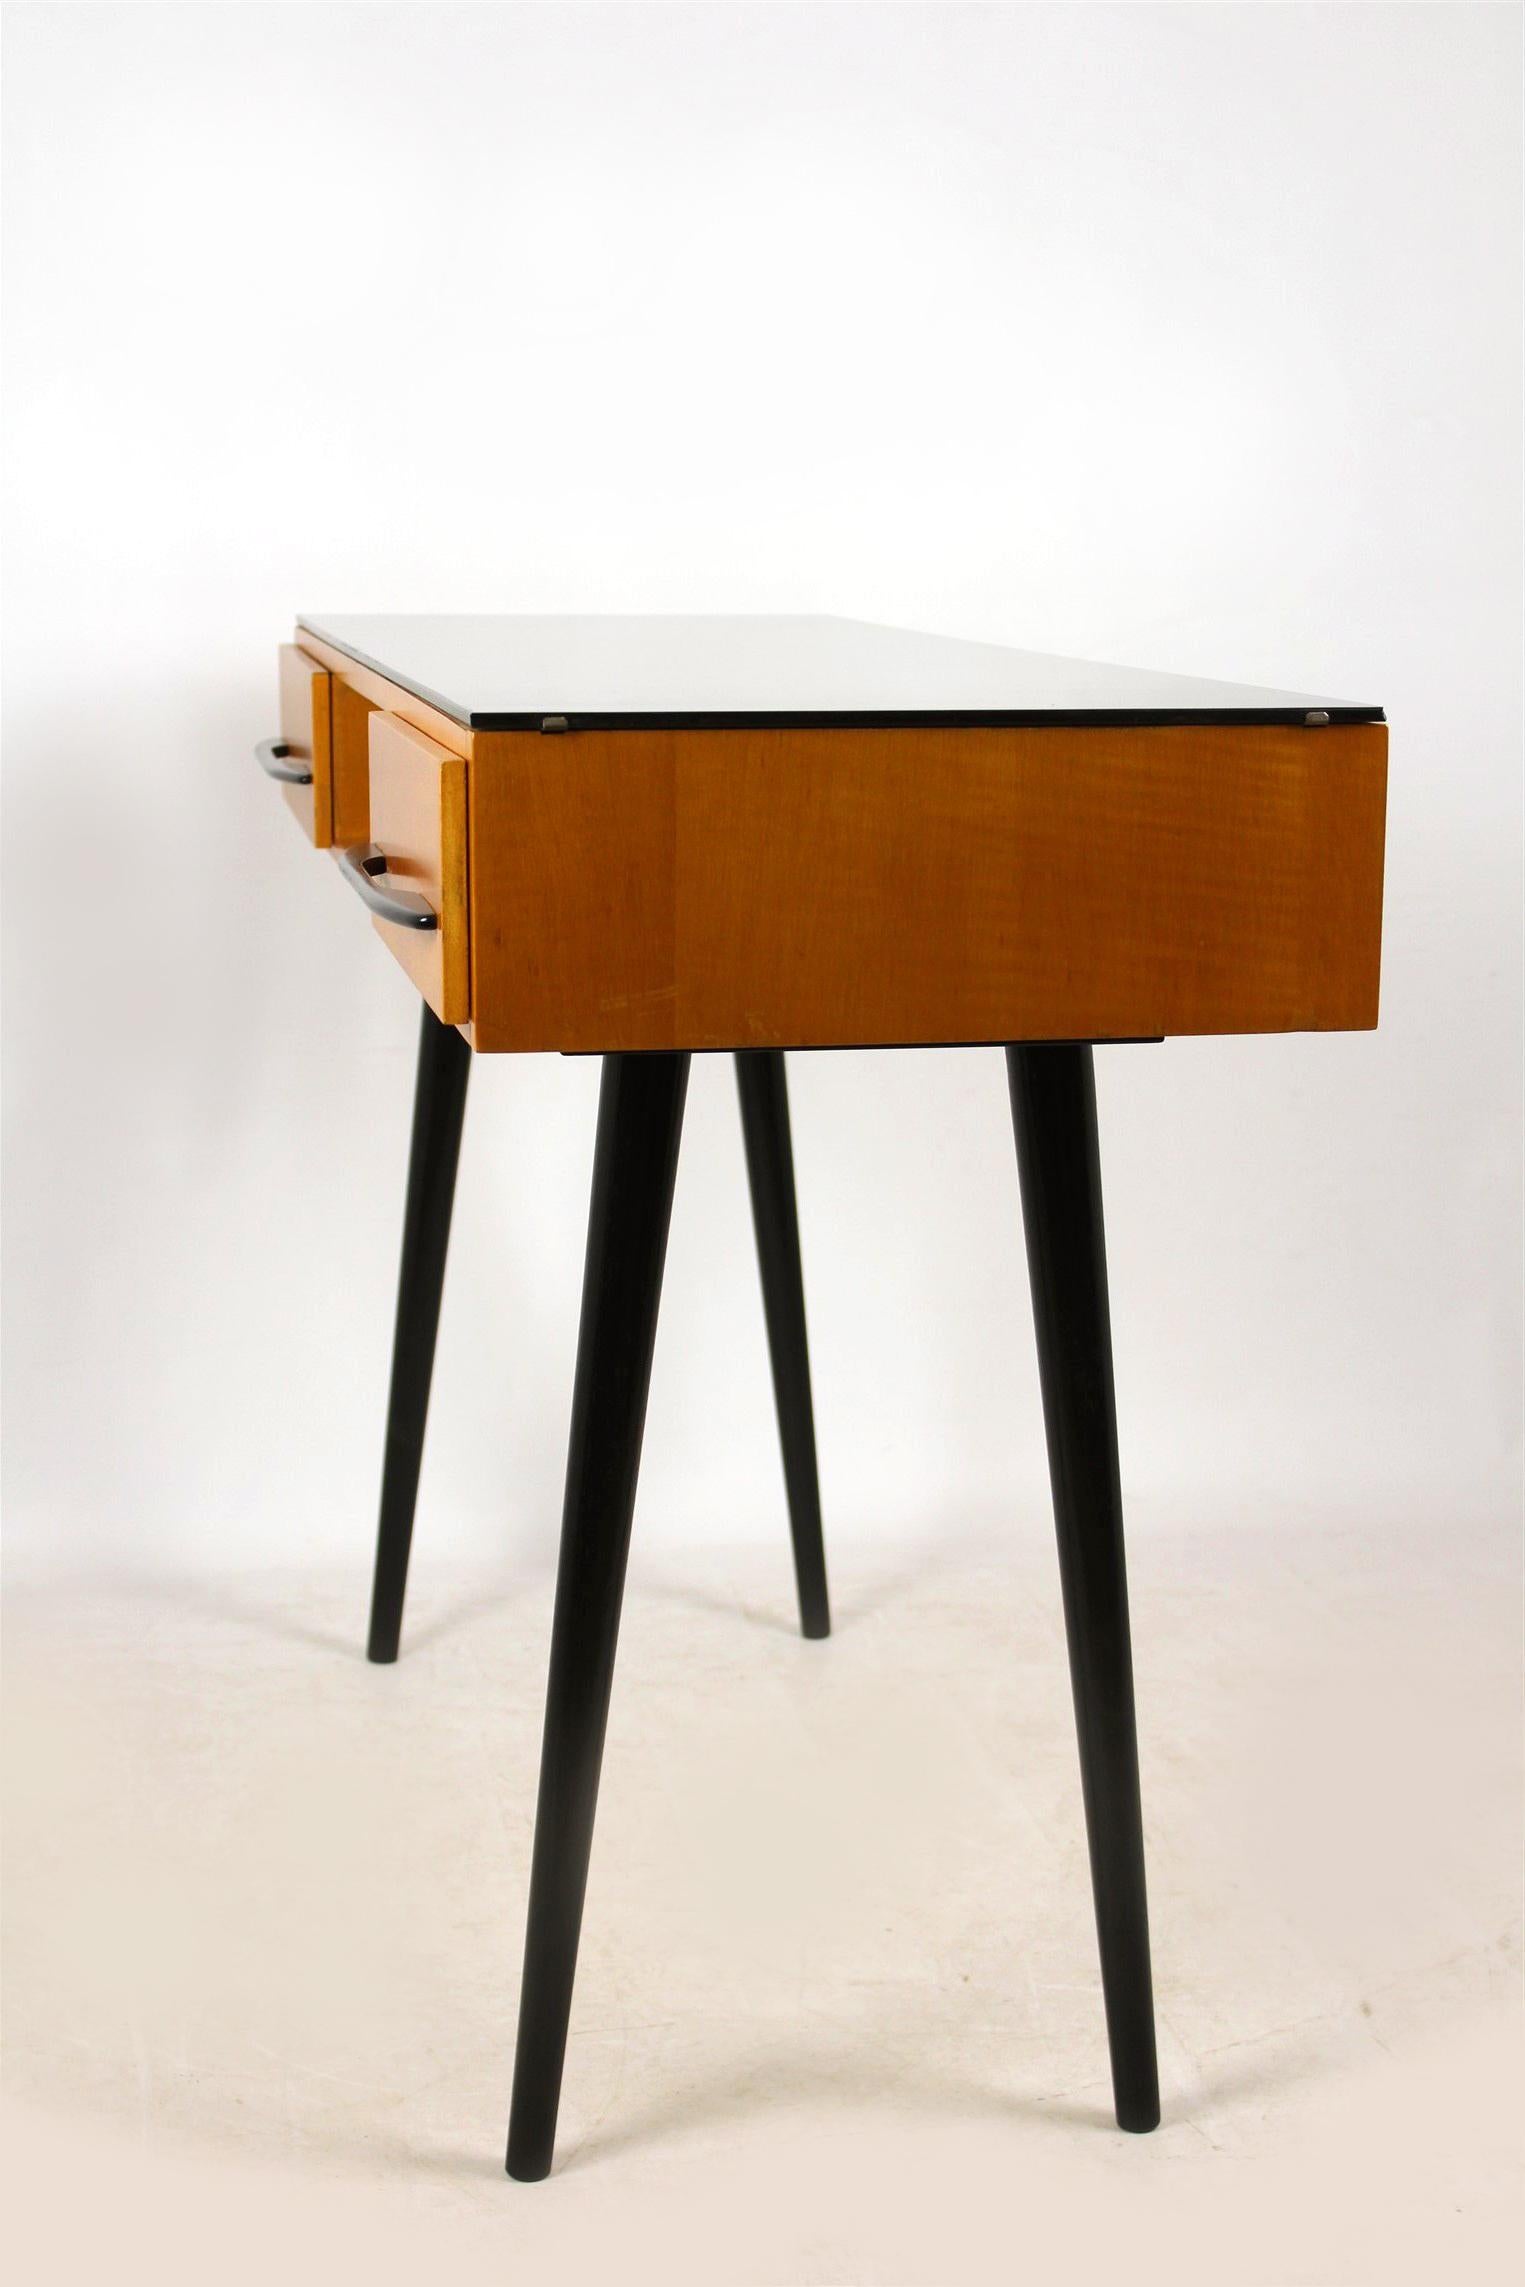 Midcentury Desk or Console Table by Mojmír Požár for UP Bučovice, 1960s 3